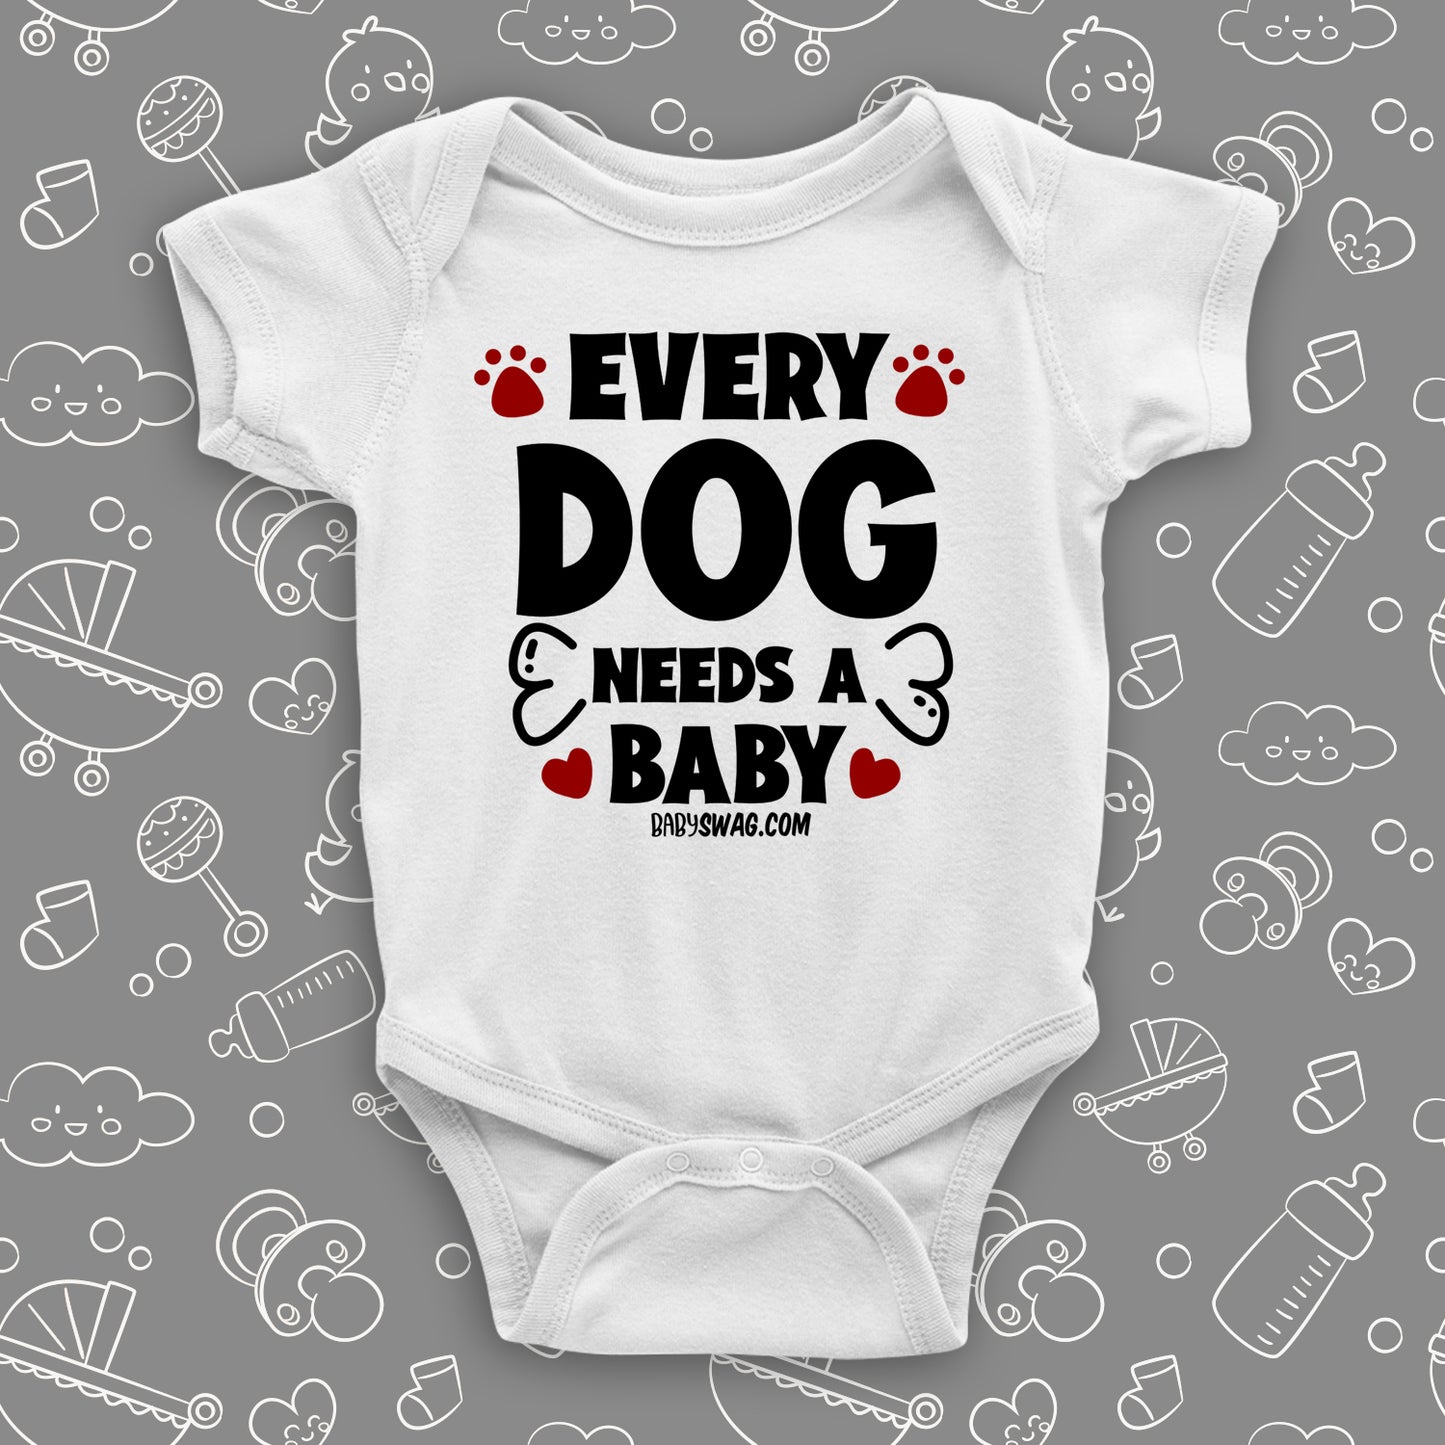 White cute baby onesie saying "Every dog needs a baby", red paws and bone also printed.